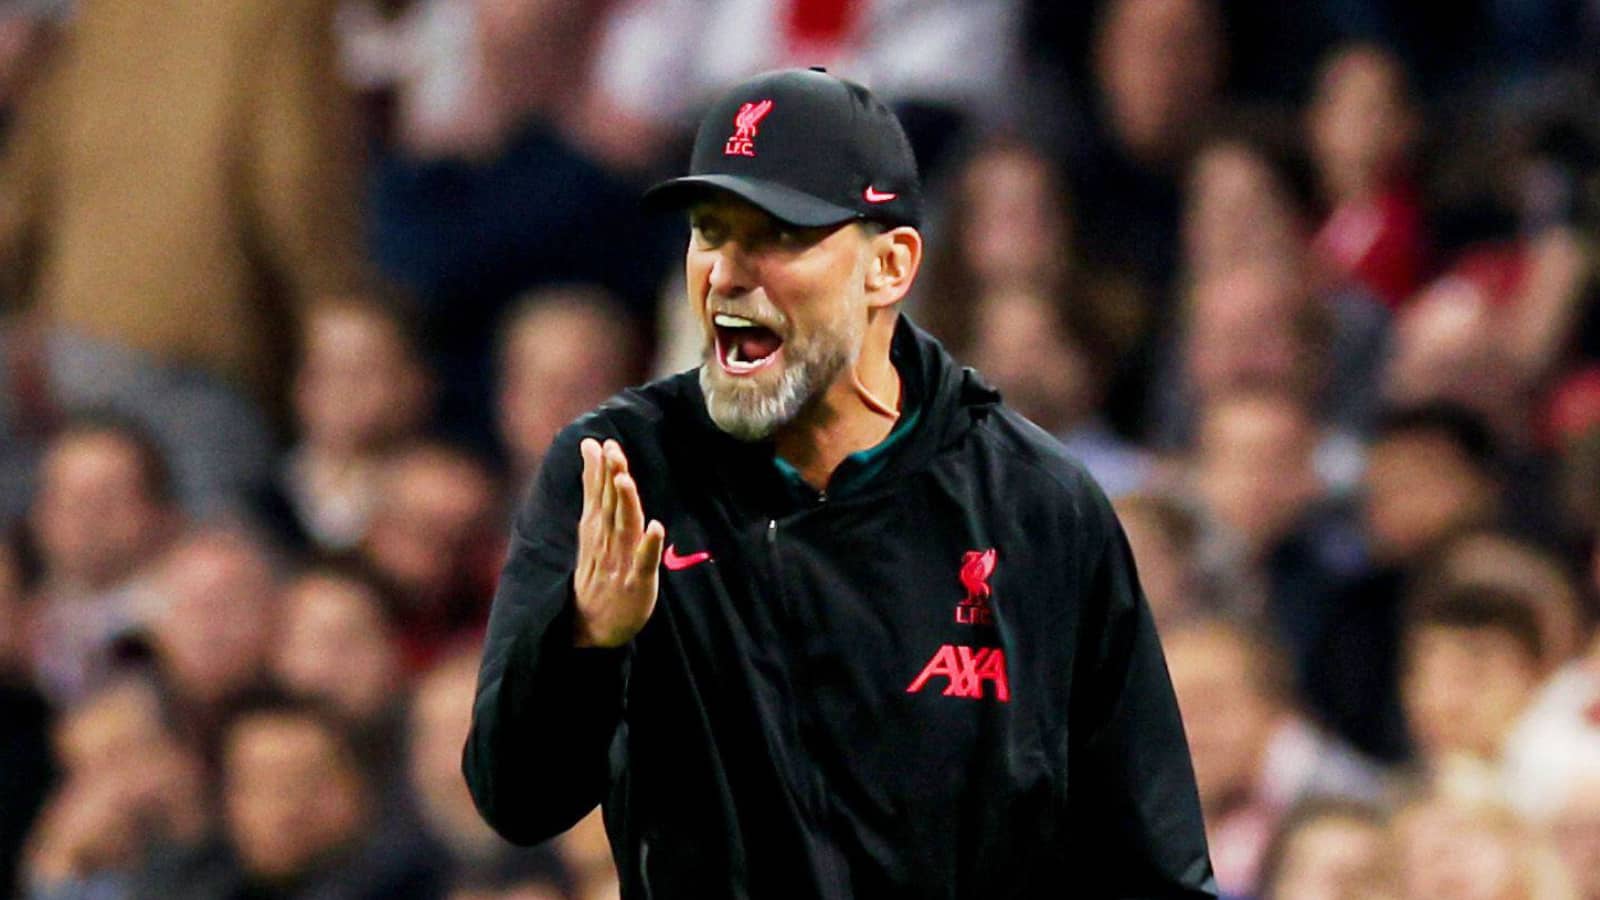 Opinion: Liverpool’s Jurgen Klopp should be kept in the Anfield stands until he learns to calm down CaughtOffside